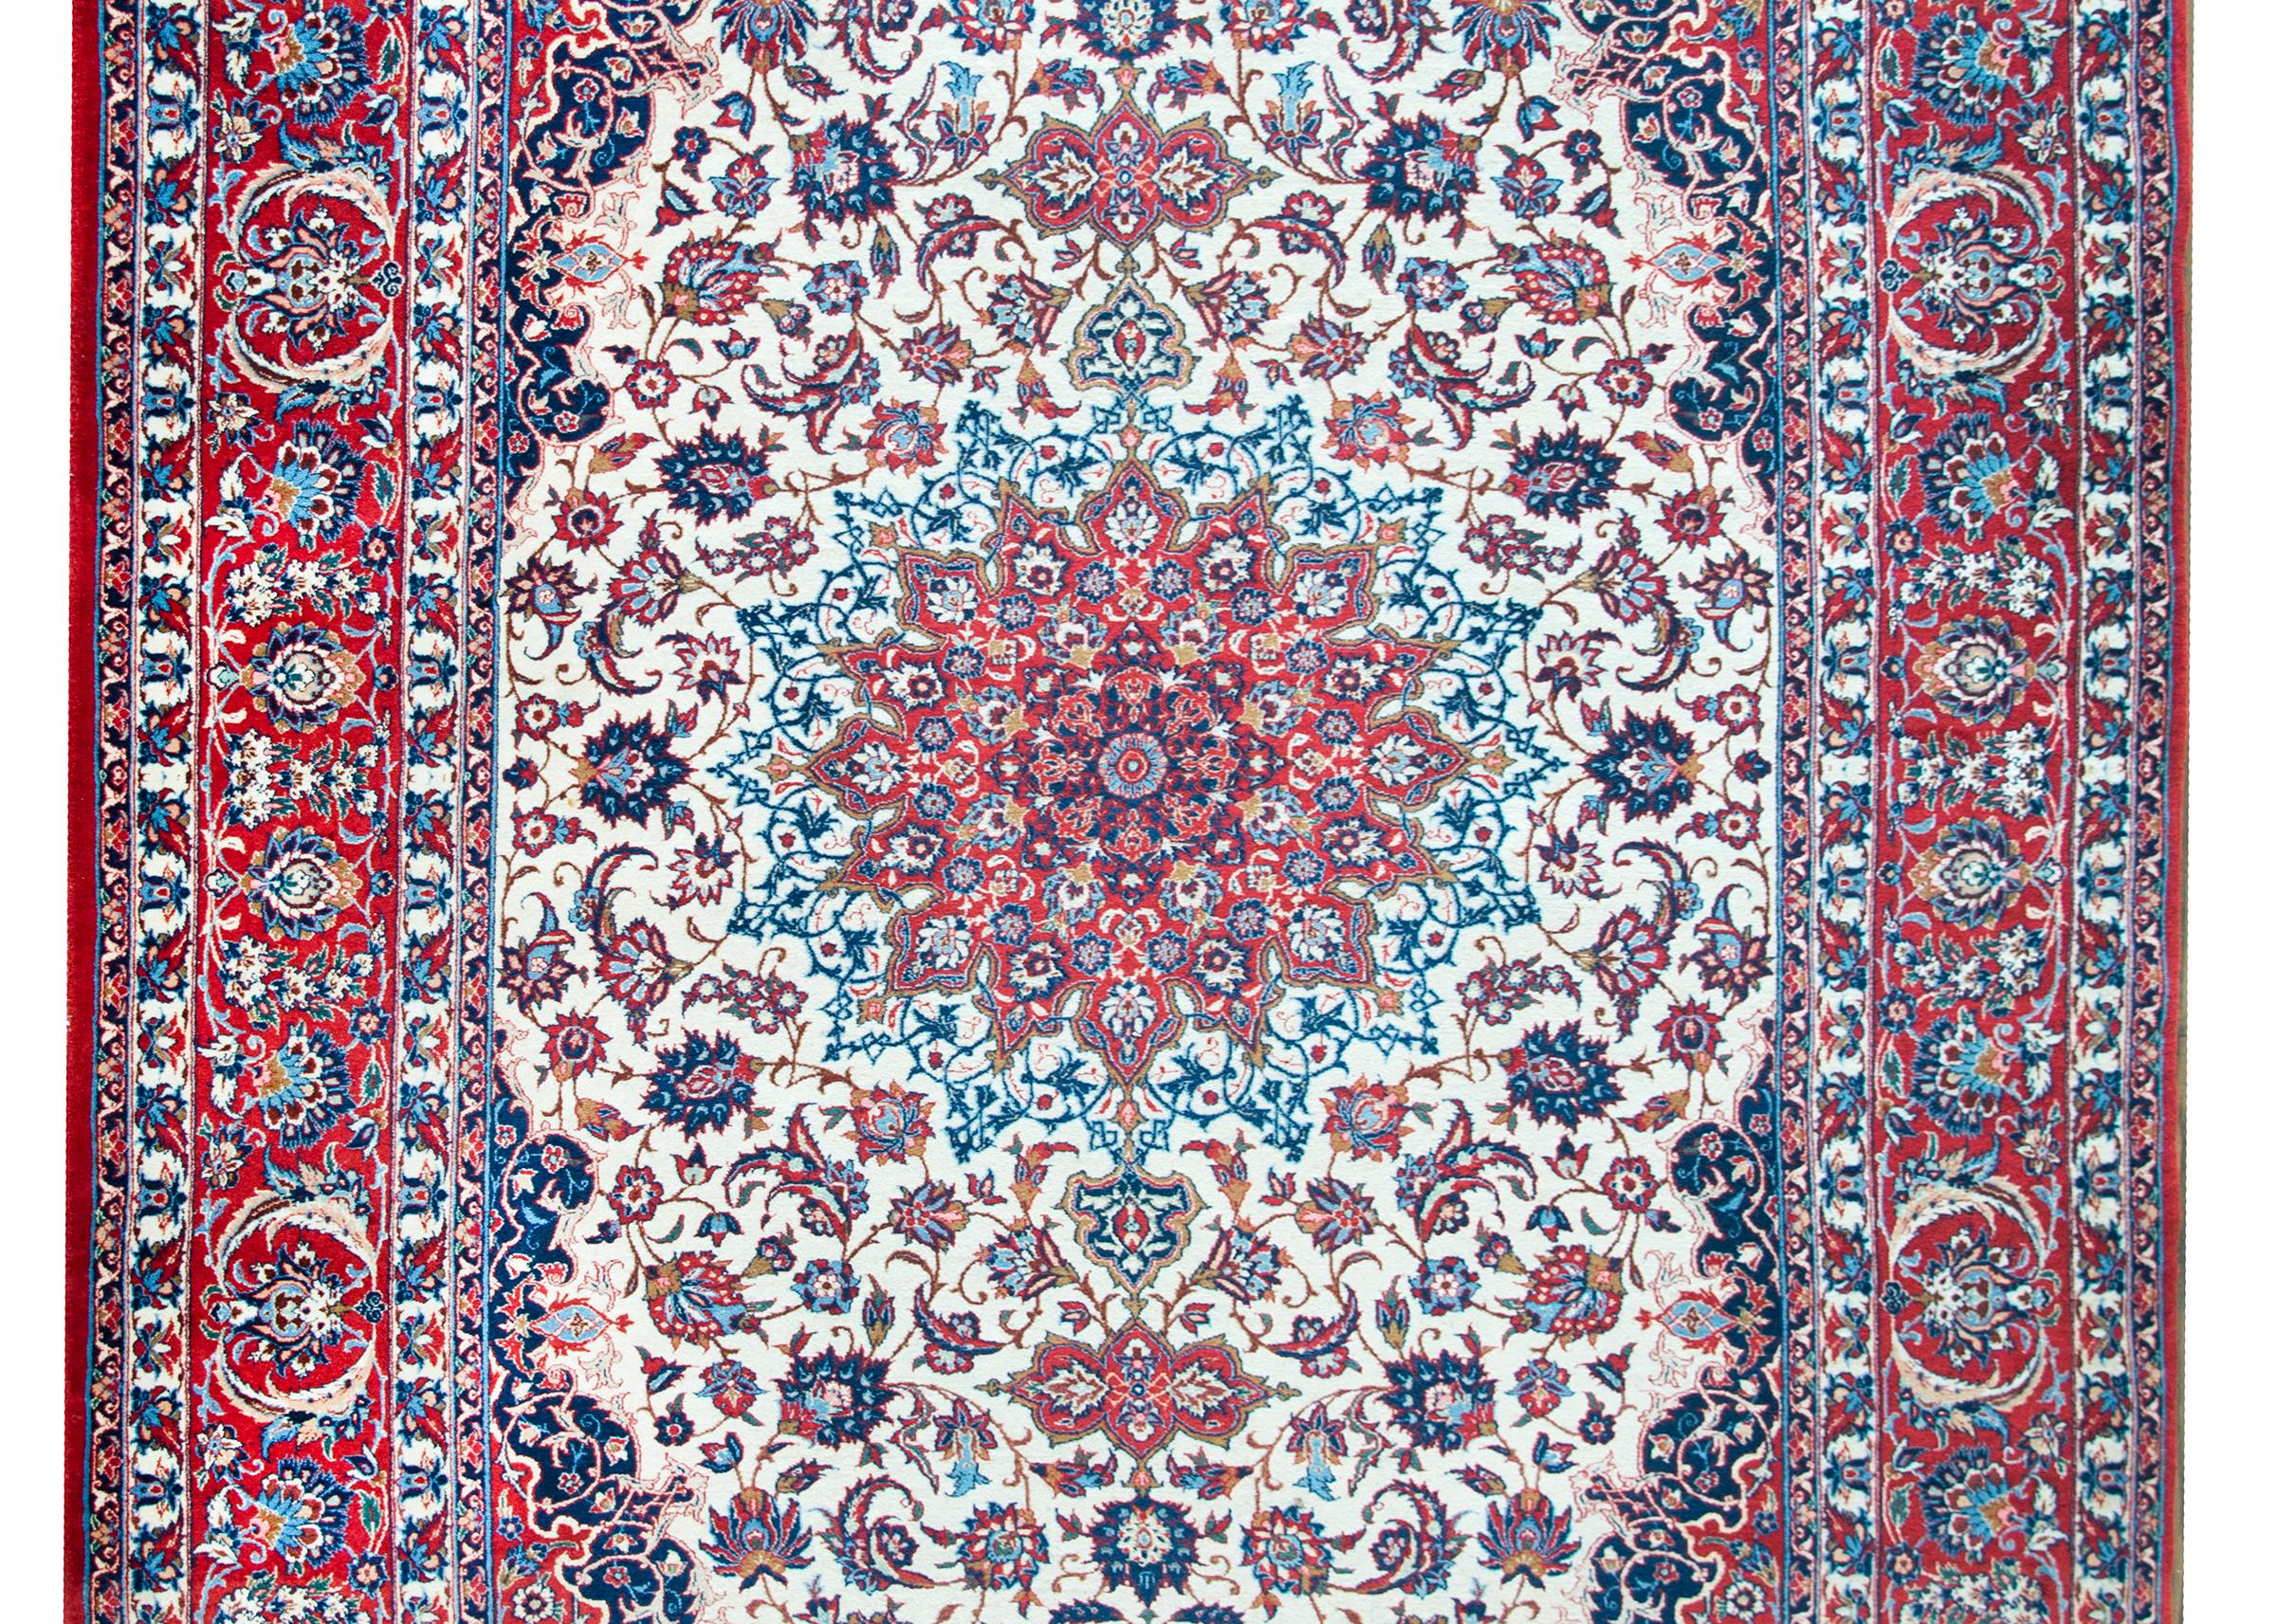 A mesmerizing mid-20th century Persian Isfahan rug with the most elaborate central floral medallion reminiscent of a stained glass window, living amidst a field of intensely woven flowers and scrolling vines, surrounded by a wide complex border